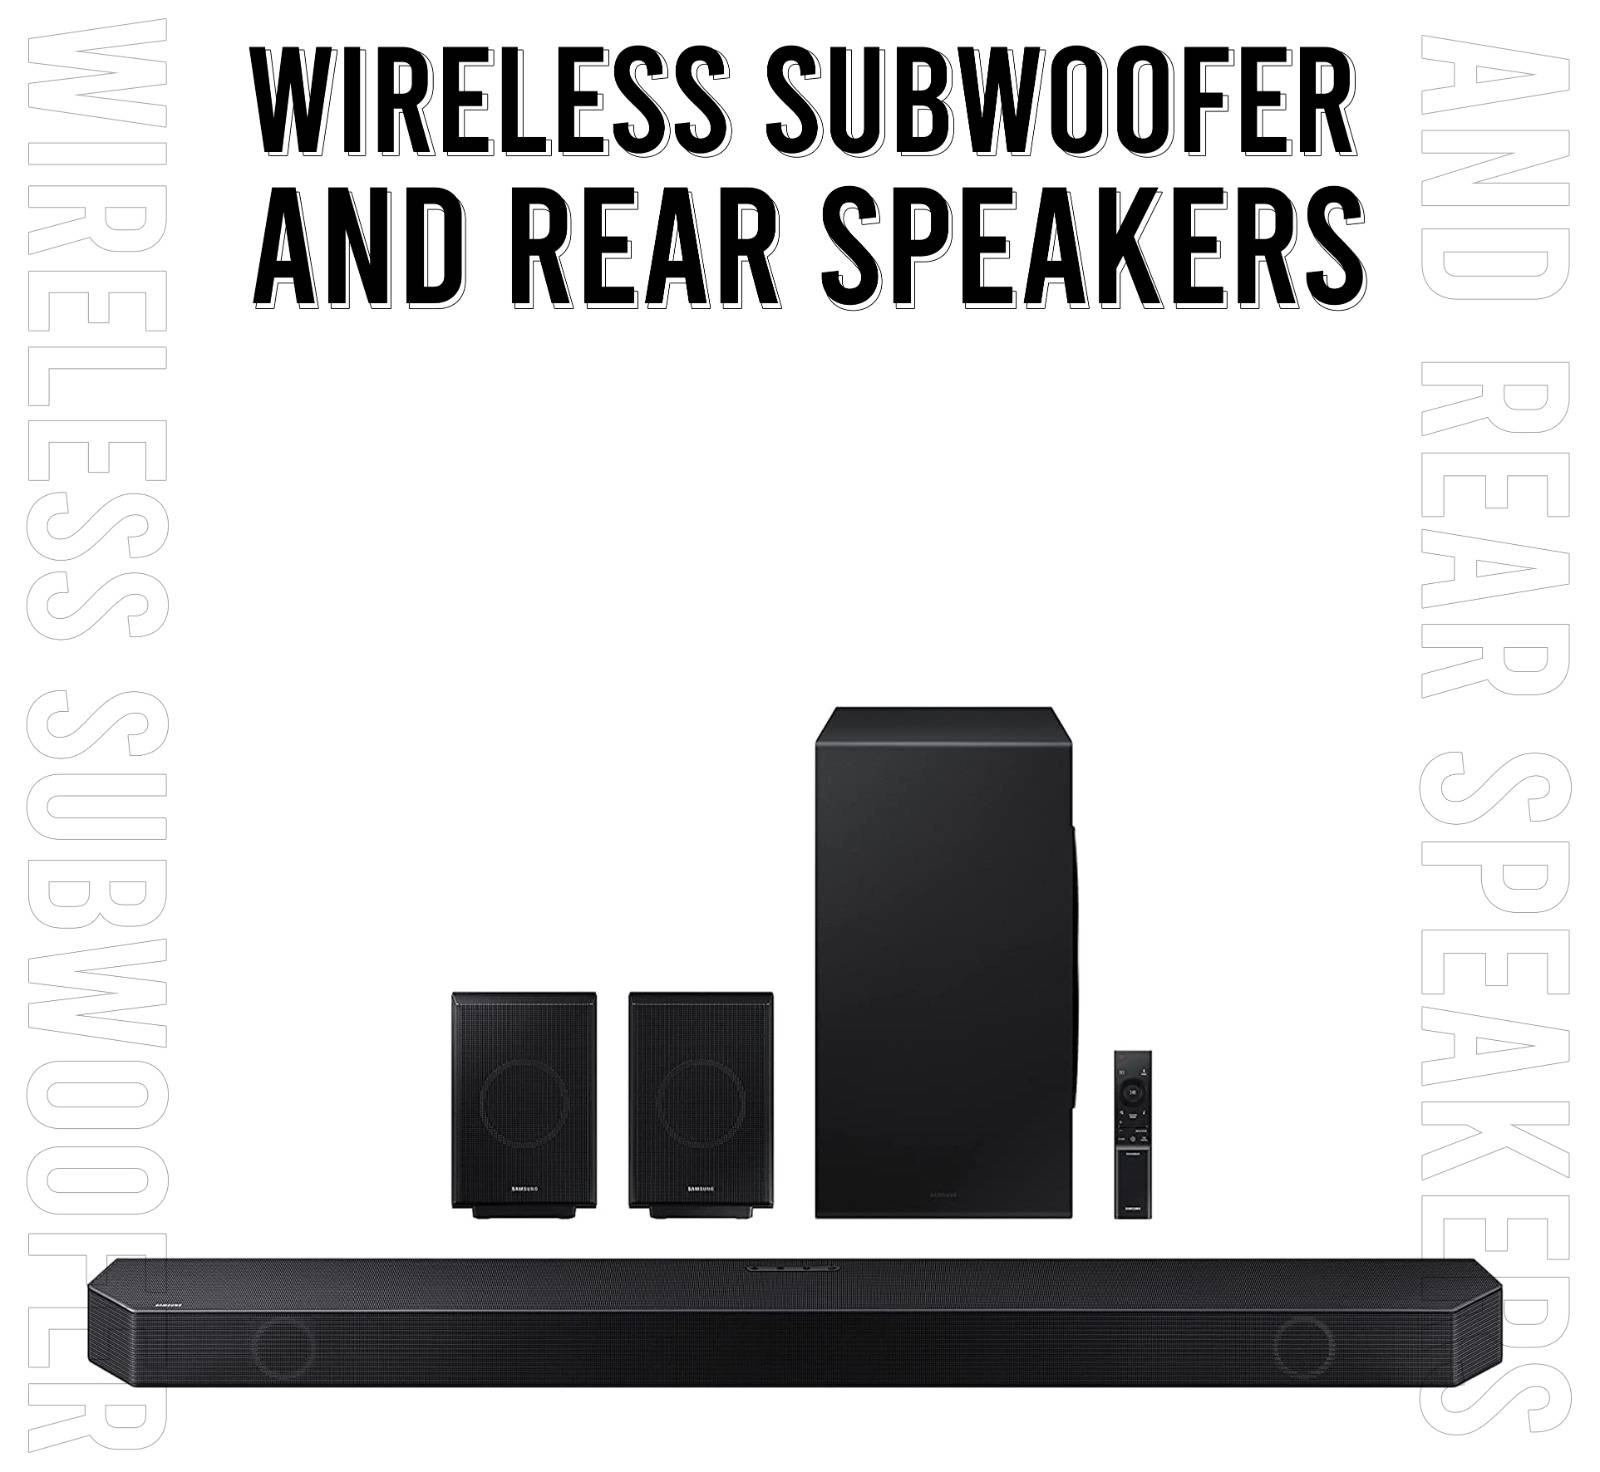 Wireless Subwoofer and Rear Speakers